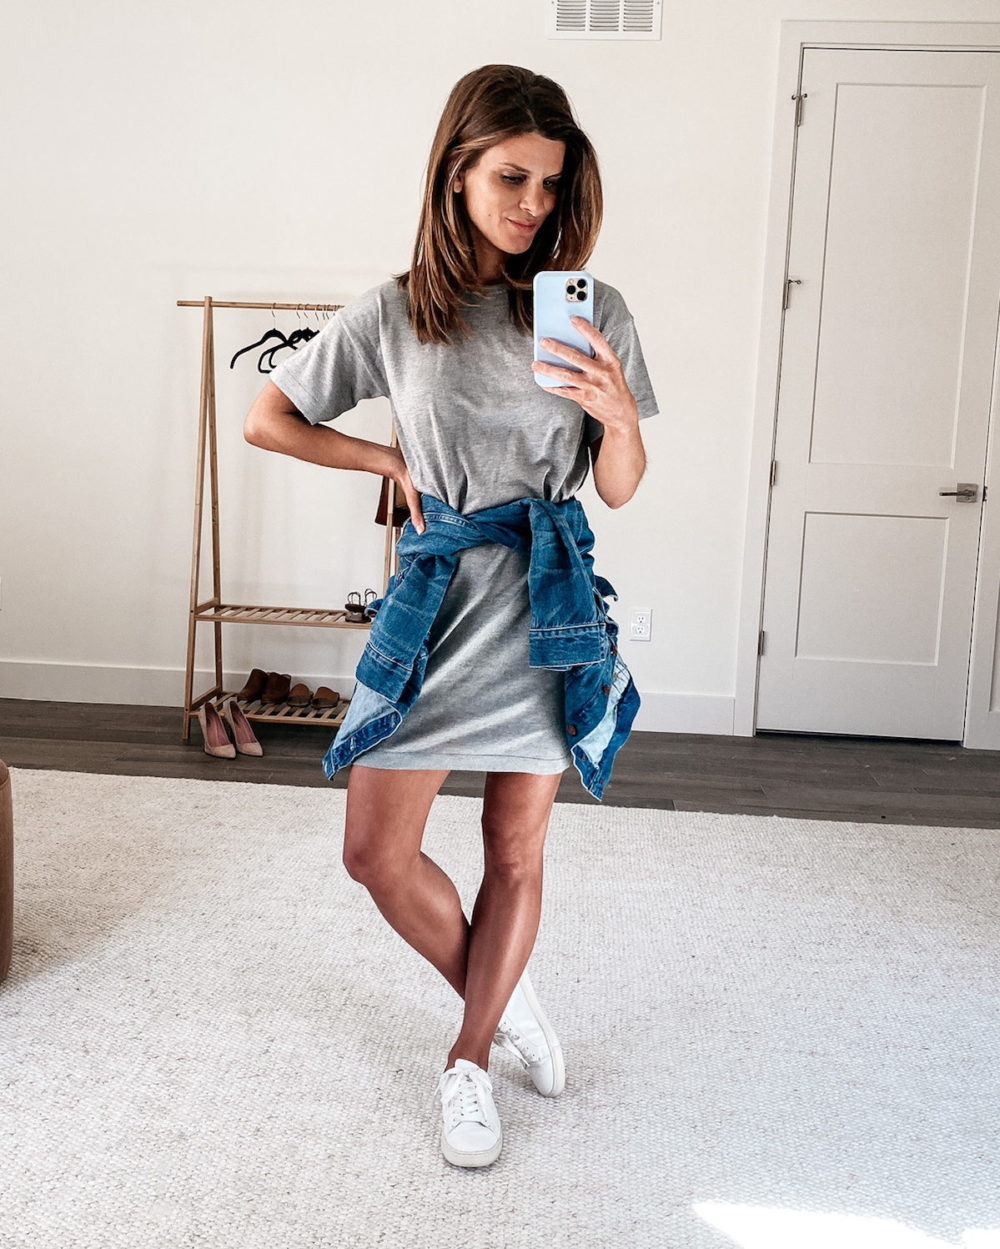 Head Over Sneakers My Tips On How to Wear Sneakers With A Dress